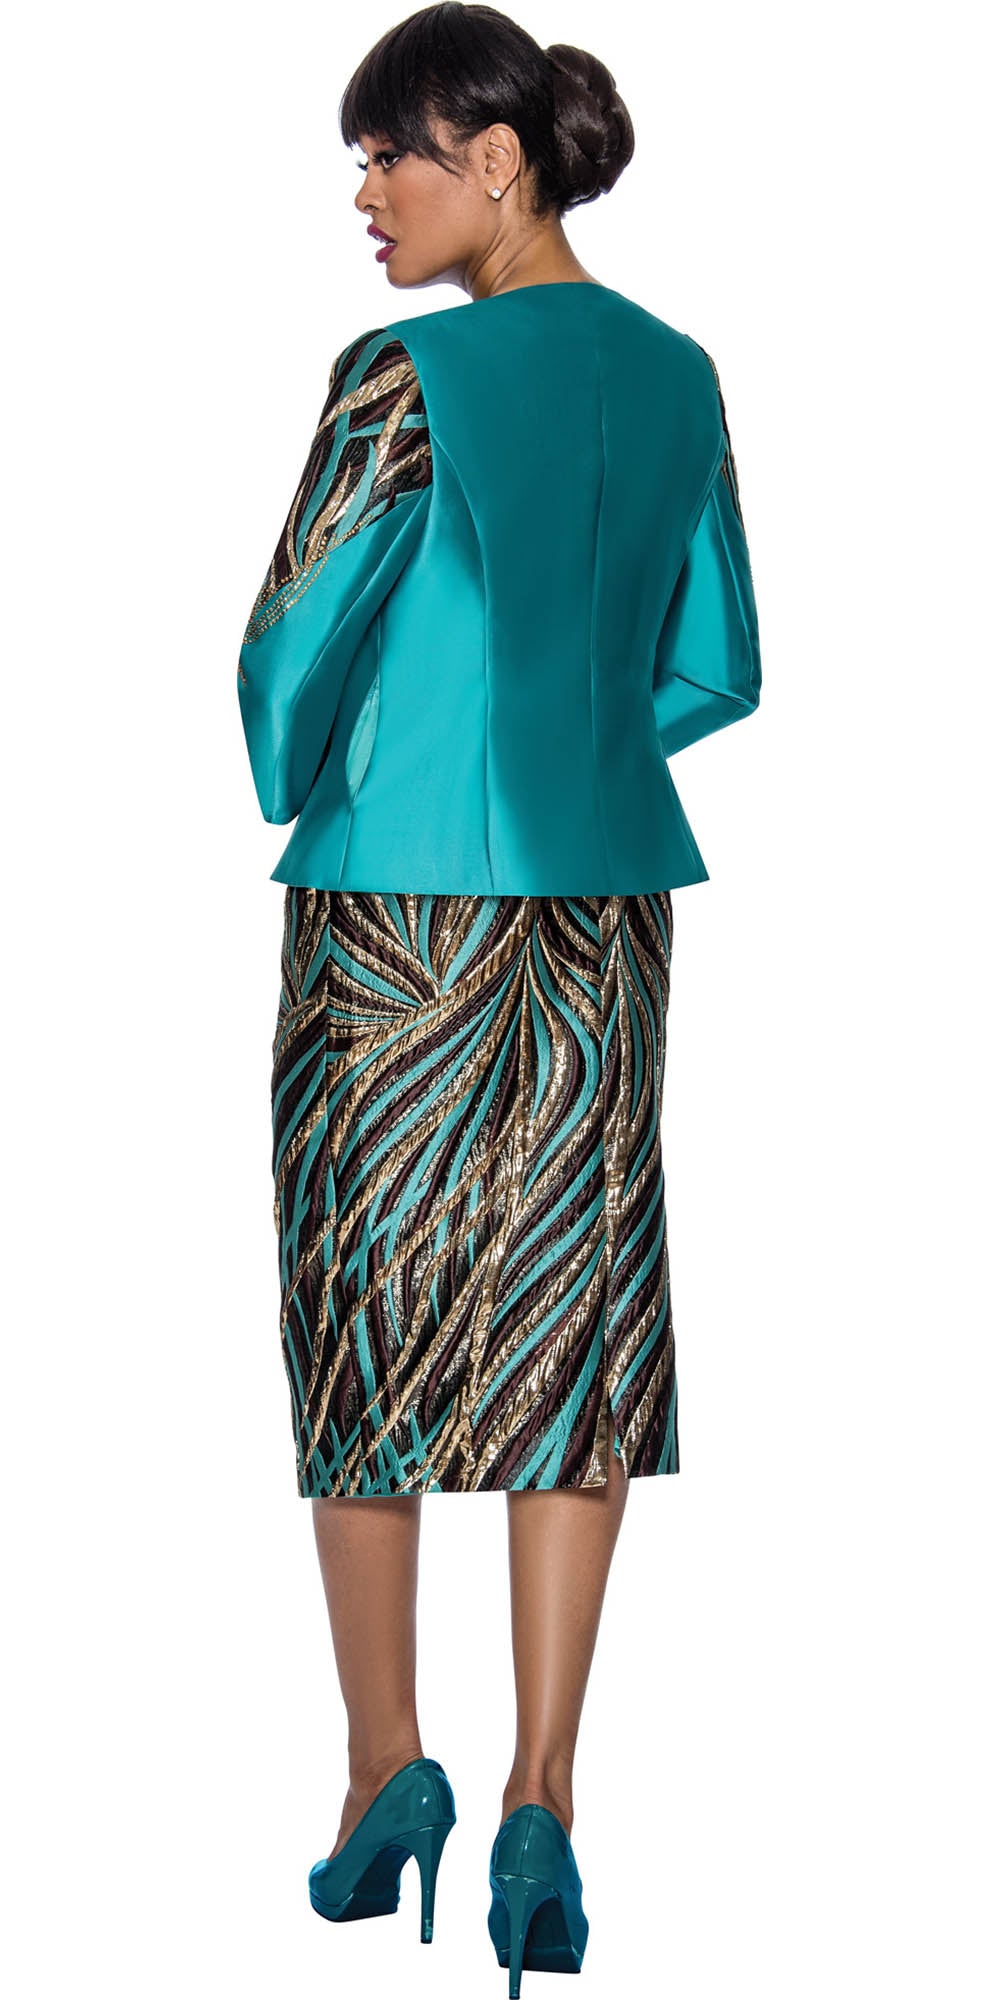 Divine Queen - 2193 - Embellished Print 3pc Skirt Suit